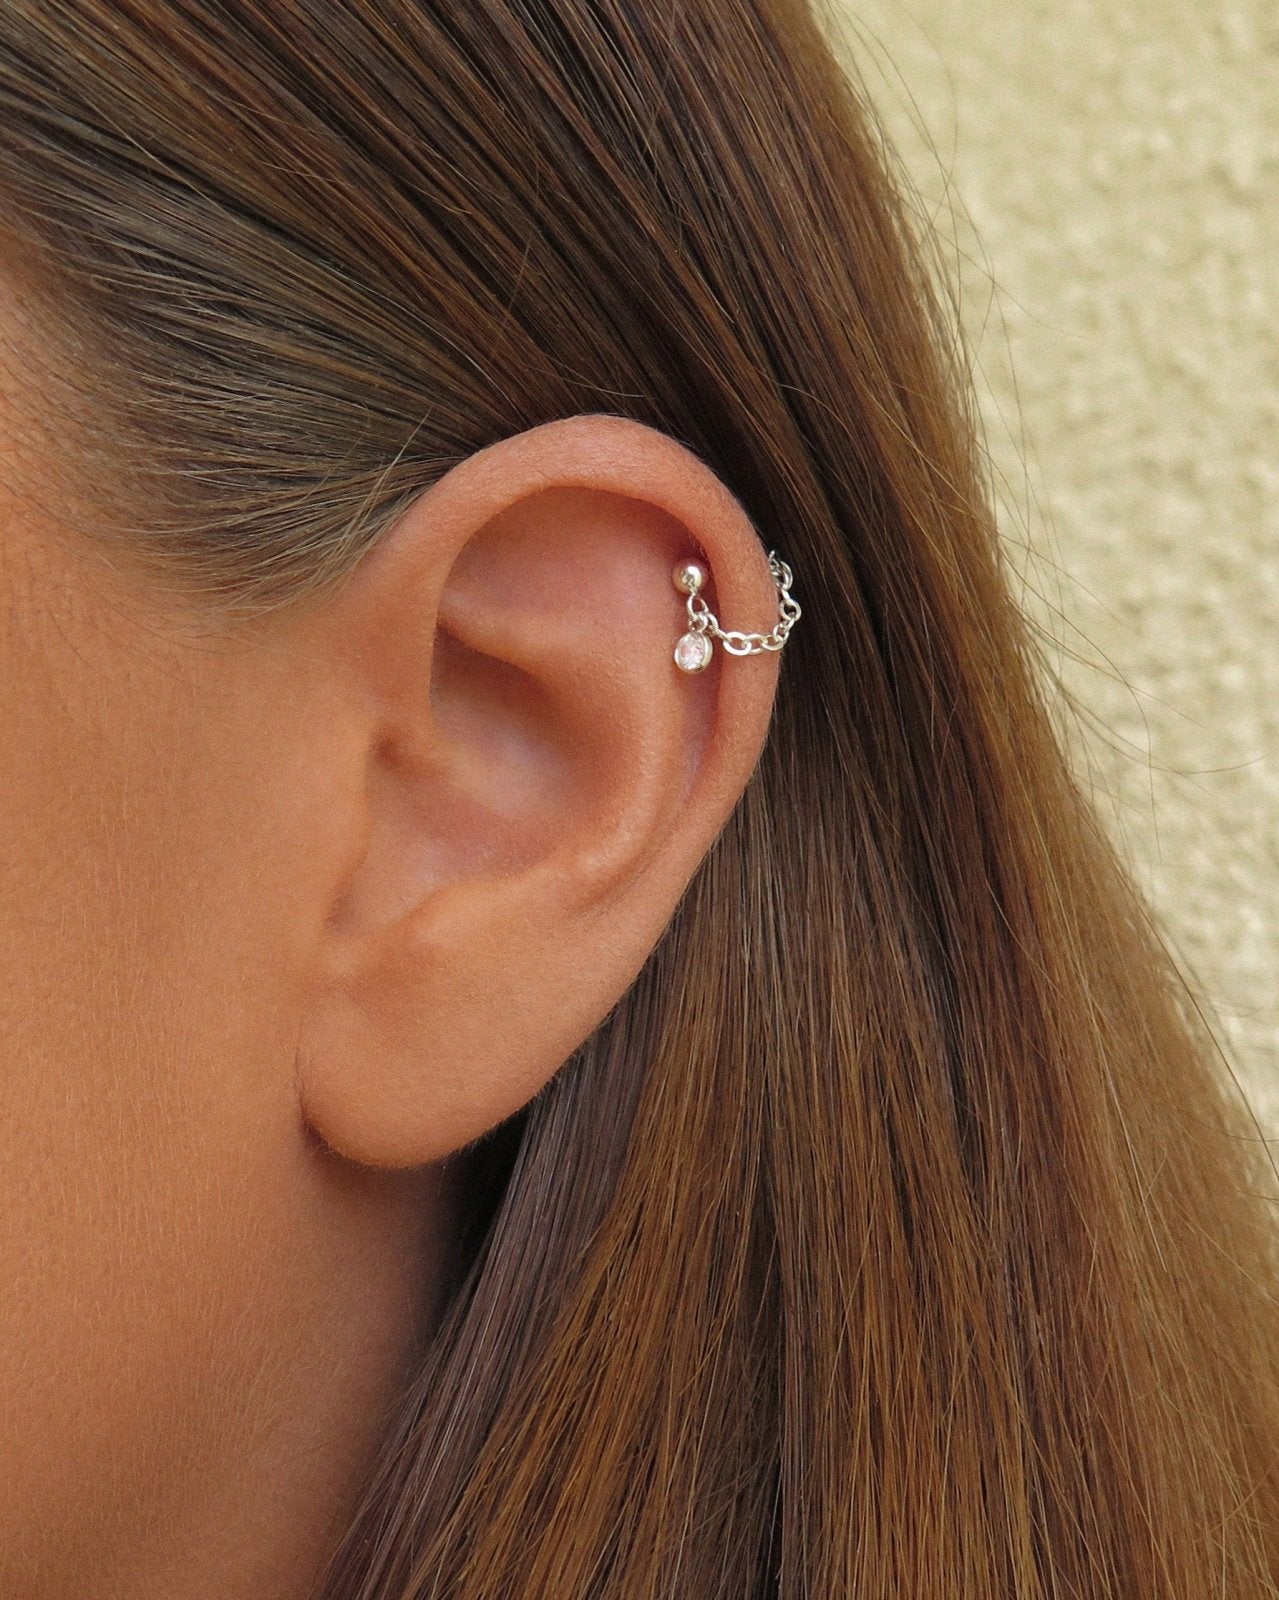 Load image into Gallery viewer, CZ HELIX PIERCING- Sterling Silver - The Littl - Sterling Silver - Deluxe Chain Earrings
